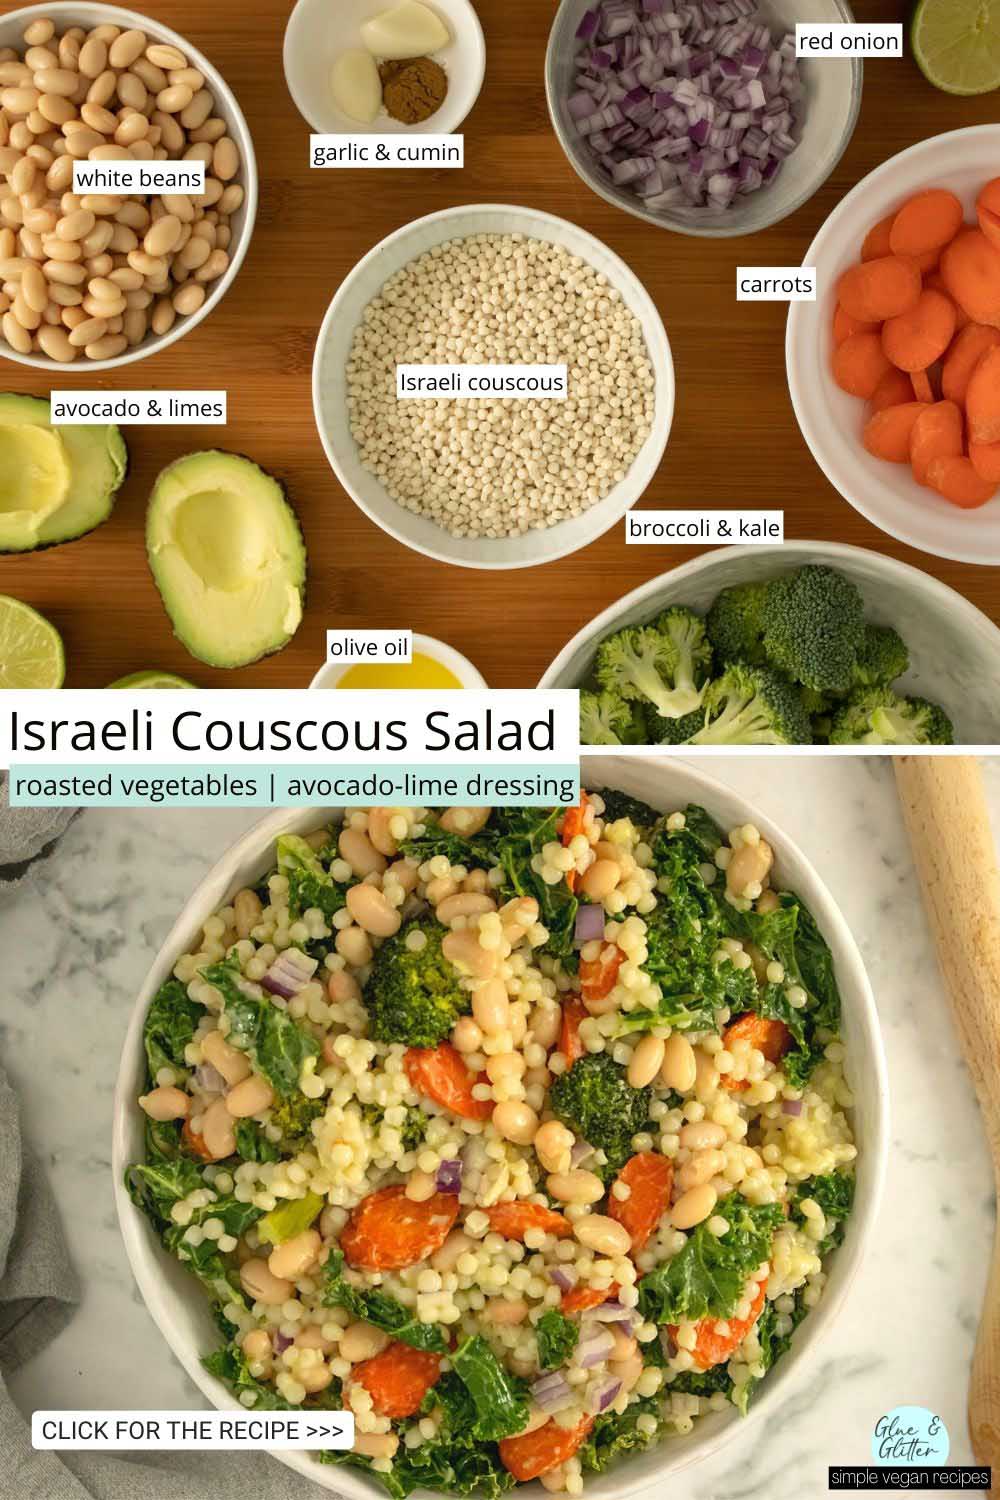 image collage of Israeli couscous, beans, and veggies with text labels and a photo of the finished salad in a serving bowl